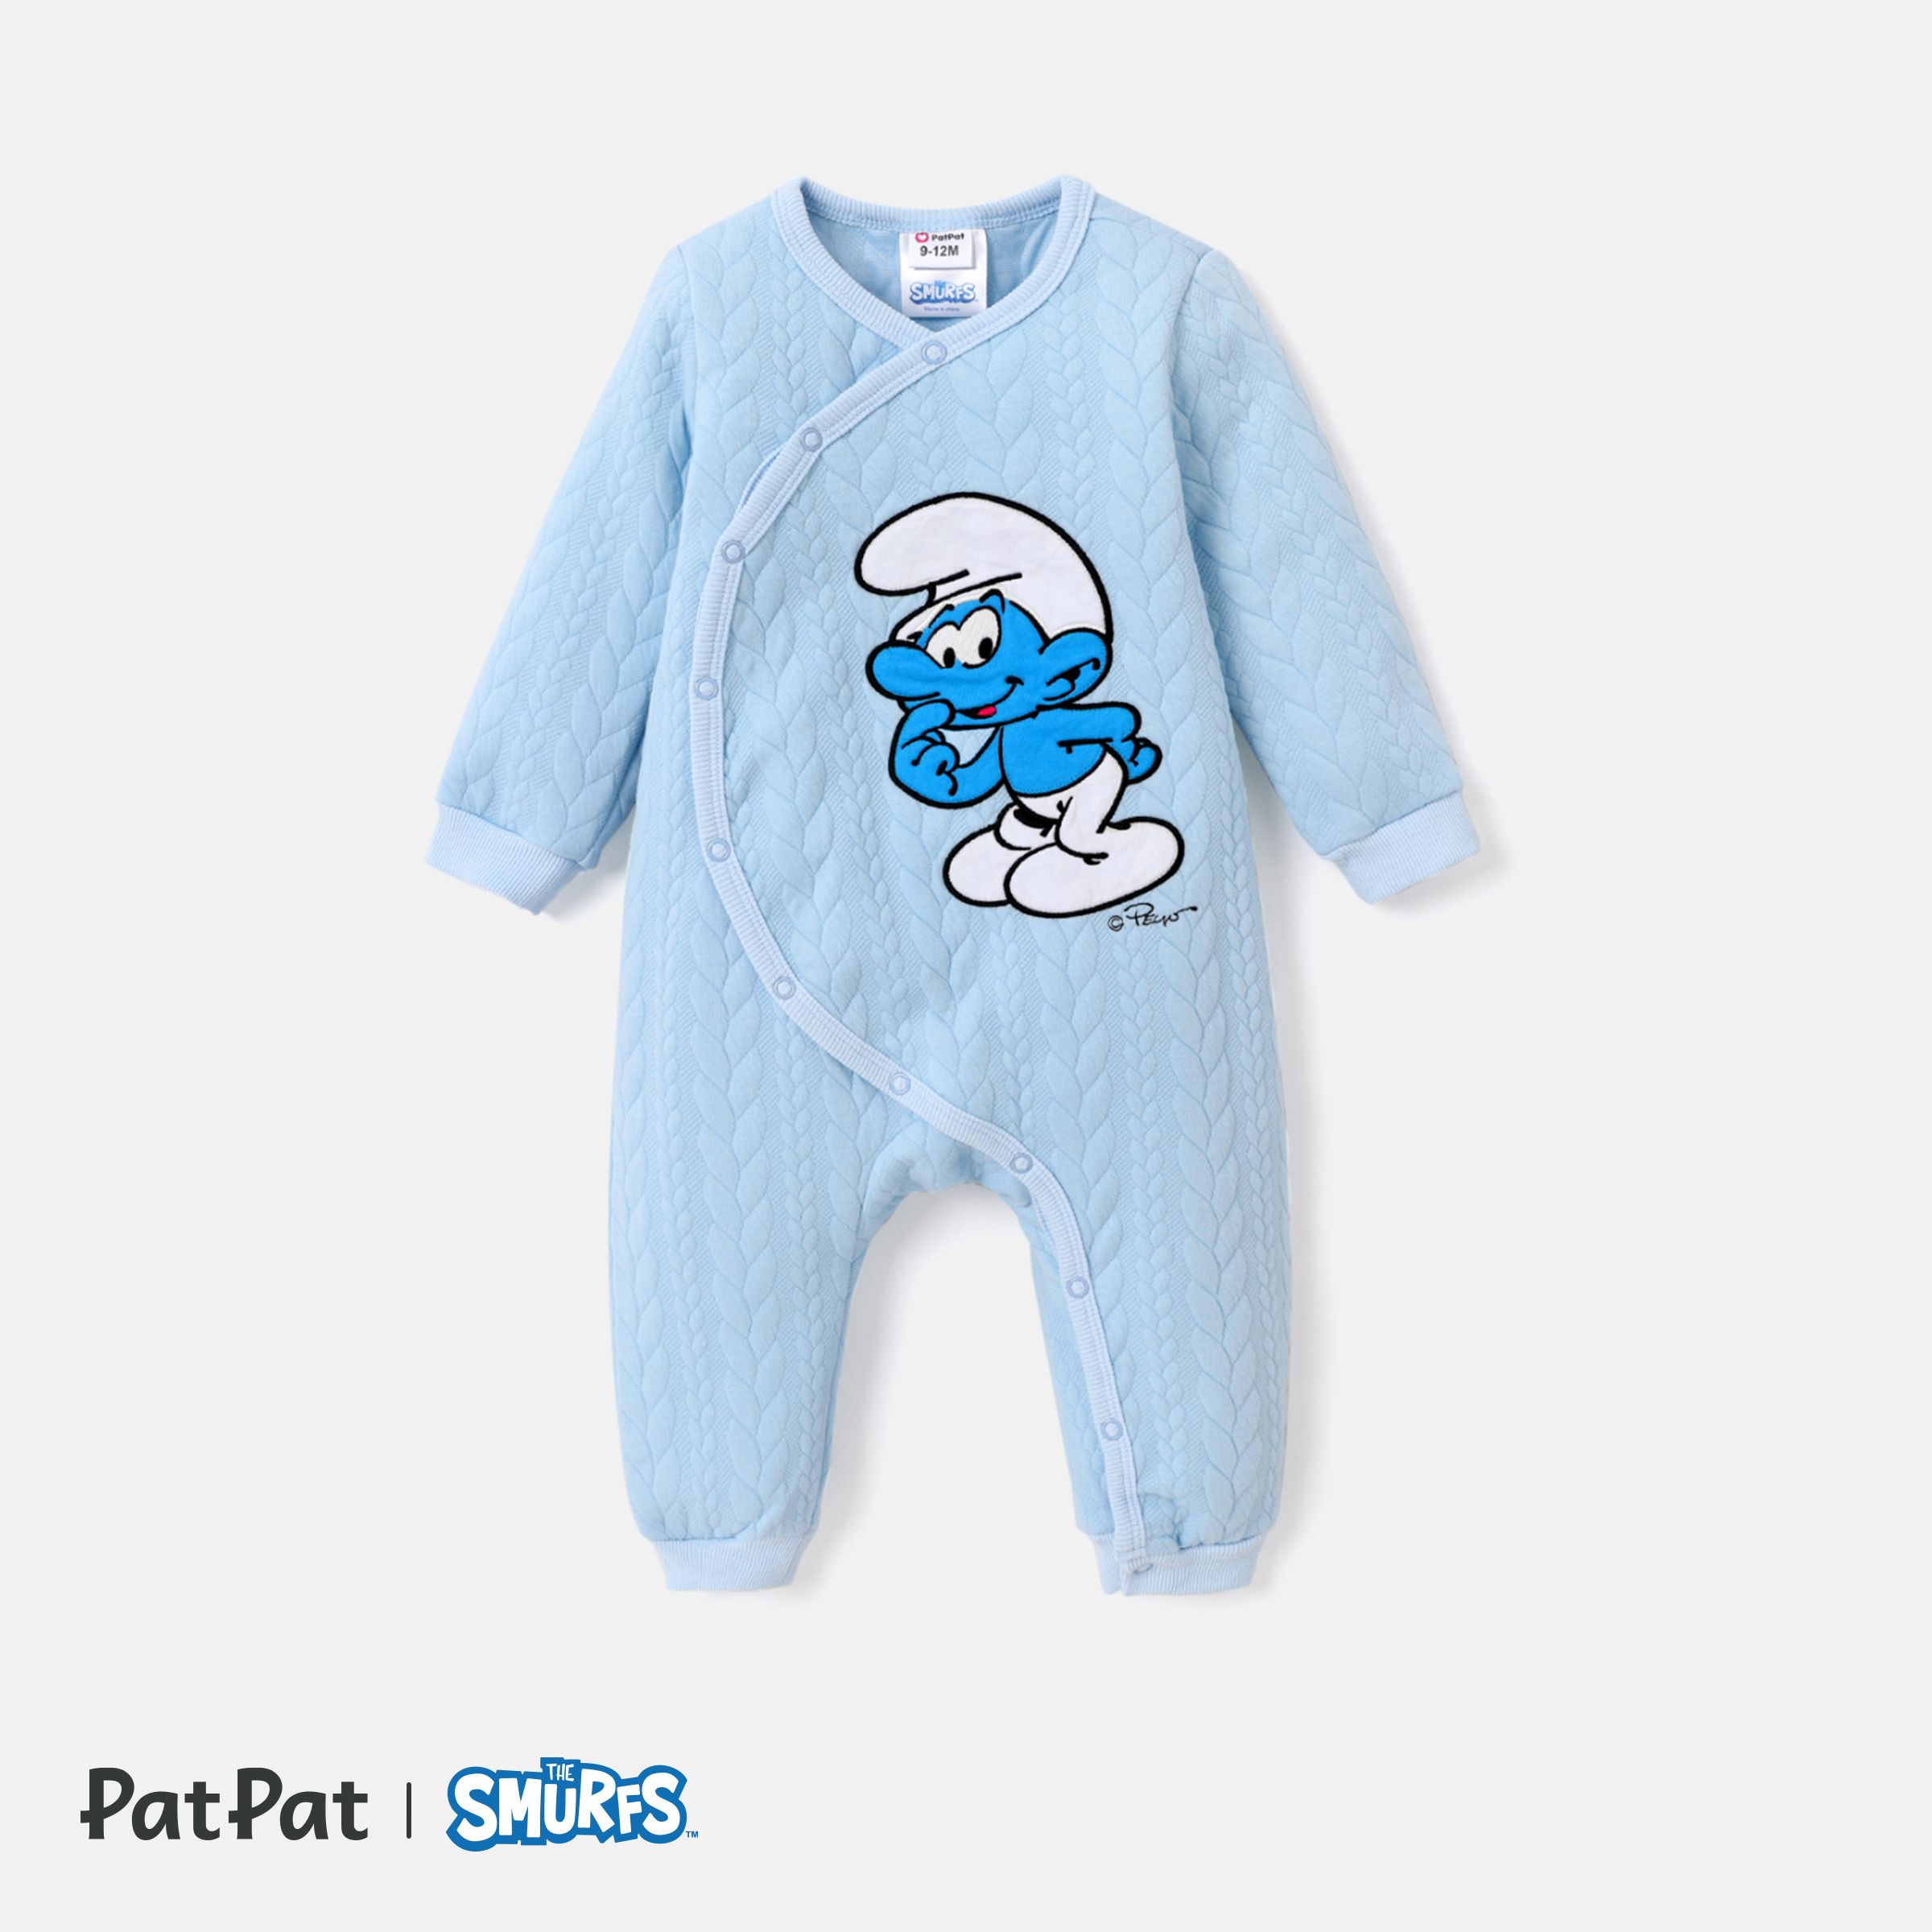 The Smurfs Baby Boy/Girl Patch Embroidered Jumpsuit